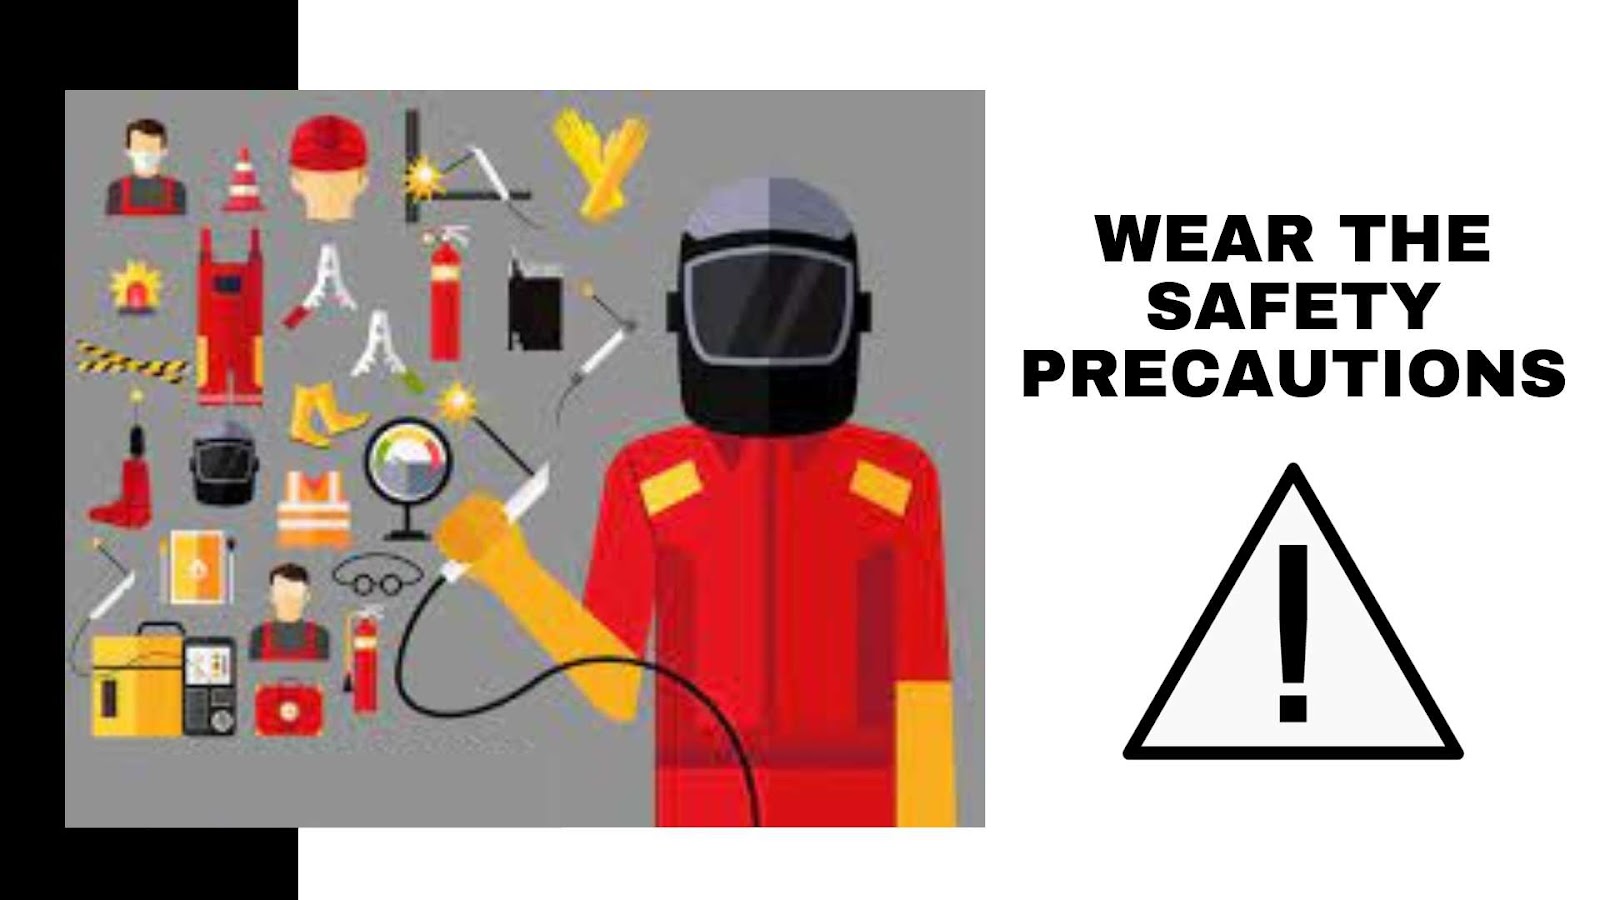 Wear the Safety Precautions